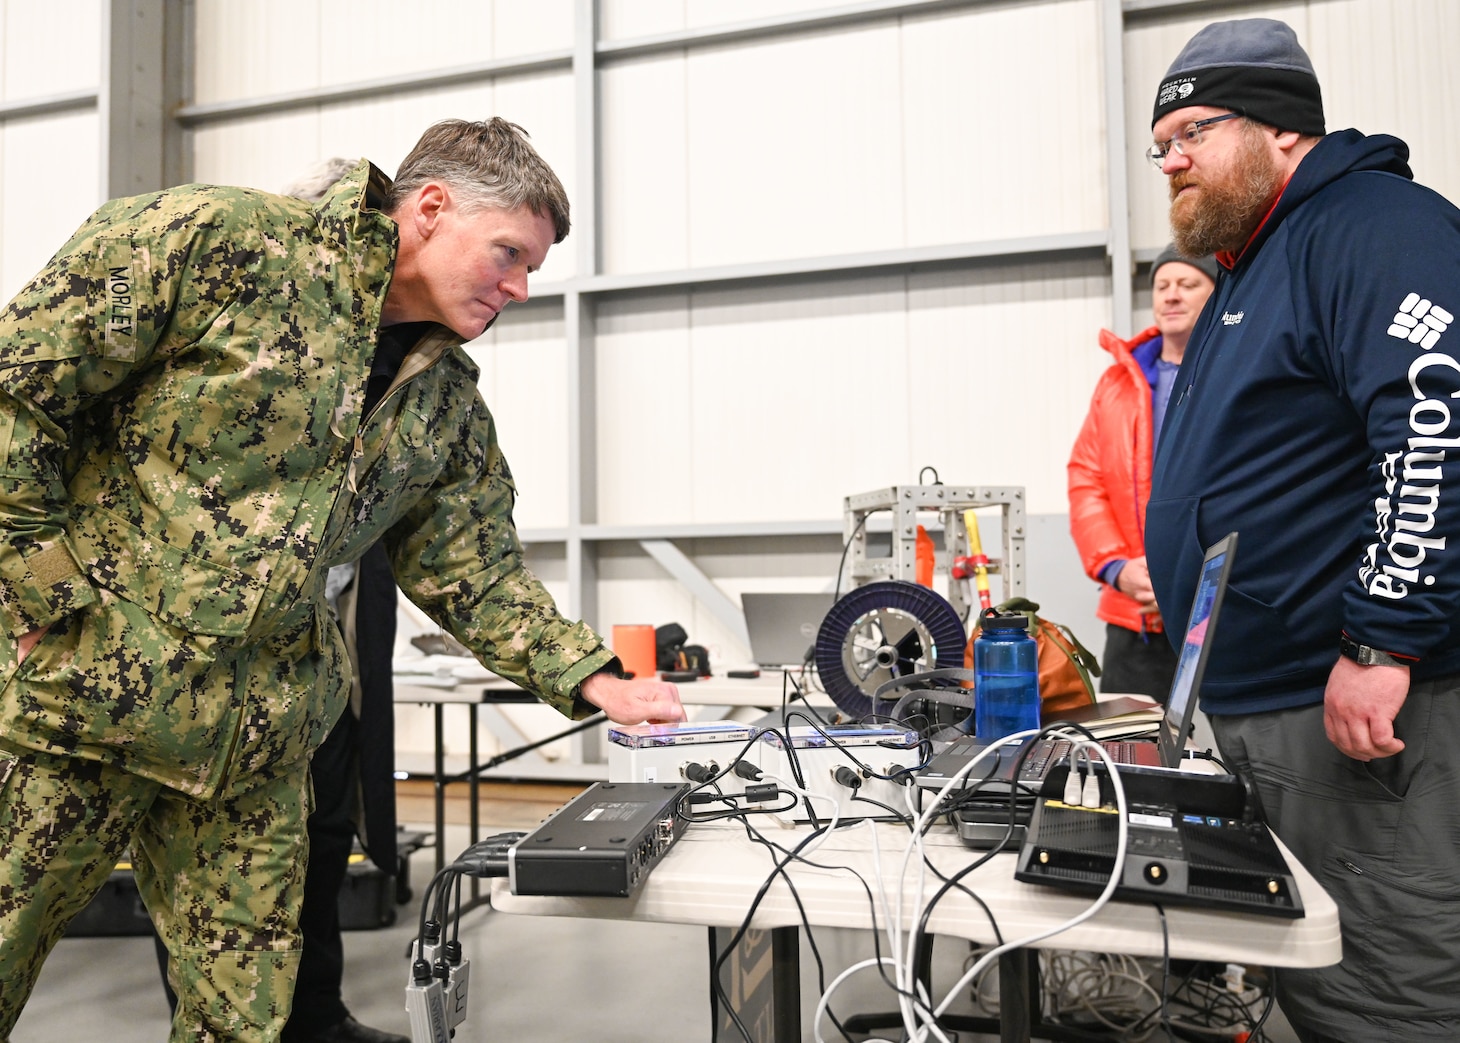 Vice Adm. Frank Morley, left, Principal Military Deputy Assistant Secretary of the Navy for Research, Development and Acquisition, tests a seismometer while Benjamin Evans, a researcher from the Massachusetts Institute of Technology (MIT) Lincoln Laboratory Advanced Undersea Systems and Technology Group, explains his team's research at the Deadhorse Aviation Center-East hangar in Prudhoe Bay, Alaska, during Ice Exercise (ICEX) 2022.